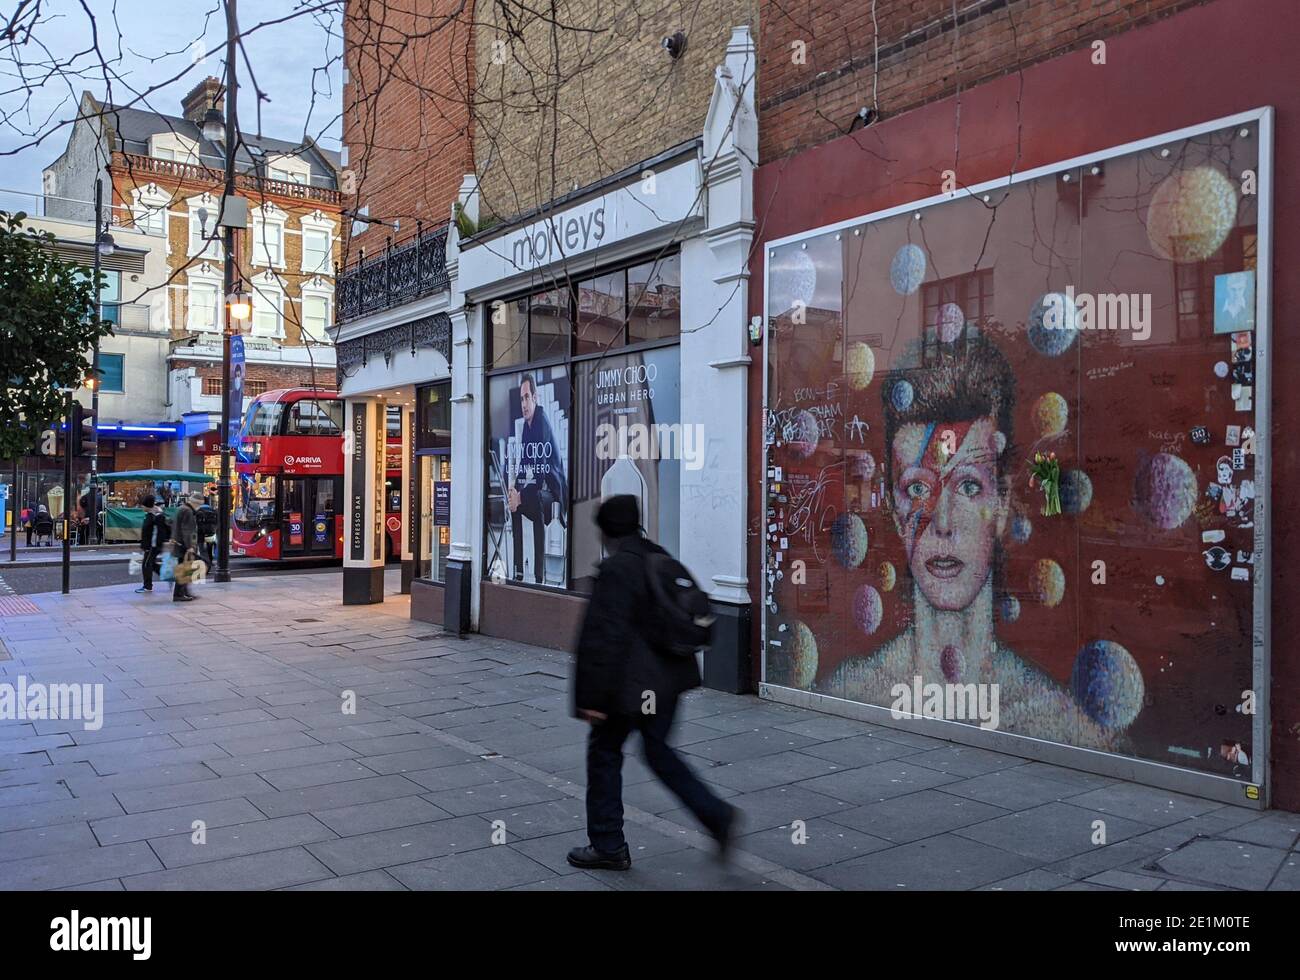 06 January 2021, United Kingdom, London: A man walks past Australian artist James Cochran's (Jimmy C) David Bowie memorial in the Brixton area, directly opposite Tunstall Place tube station. Following Bowie's death on January 10, 2016, hundreds of fans spontaneously gathered at Tunstall Place to sing his songs. The memorial became a pilgrimage site, with mourners laying flowers and photos. Because the painting had been littered with handwritten messages, it was repainted in 2016. (to dpa Extra - Fifth anniversary of Bowie's death probably without mourning fans in Brixton) Photo: Philip Dethlef Stock Photo